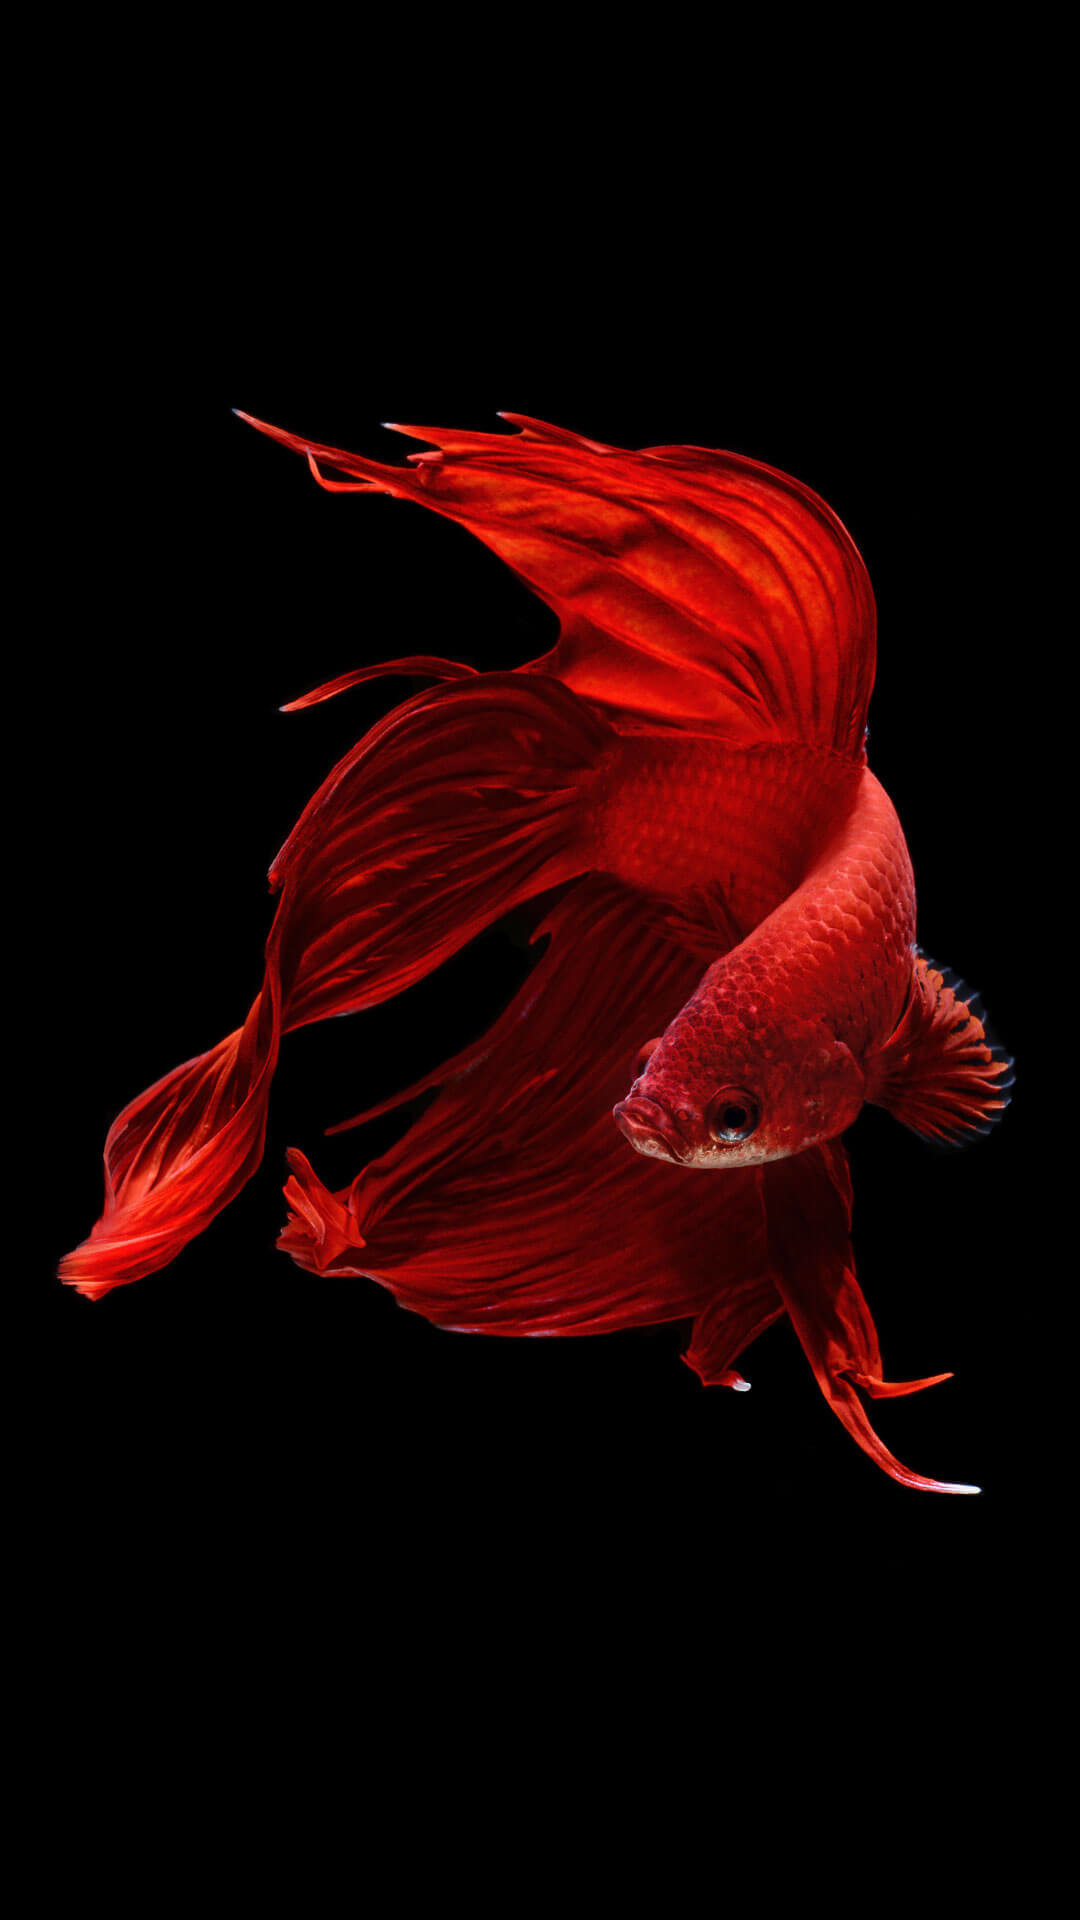 Awesome Iphone 6s Wallpaper Hd-58 - Iphone Fish Wallpaper Hd , HD Wallpaper & Backgrounds